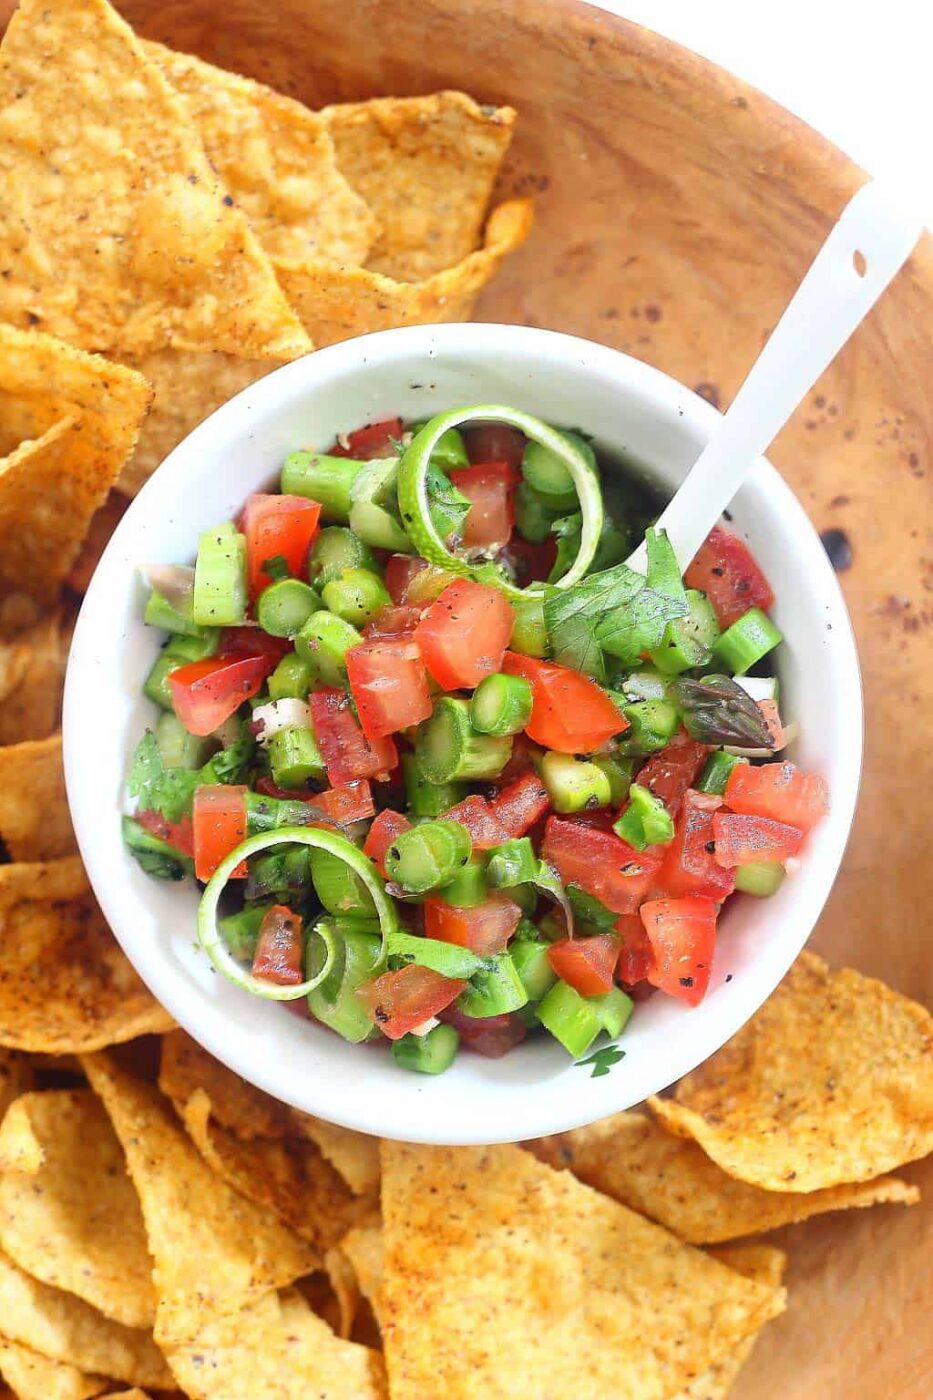 Grilled asparagus salsa + 15 Farmers market recipes to make in April! Delicious, vegetarian, (mostly) healthy spring recipes made with fresh, seasonal produce from your local farmers market or CSA bin. Eat local! // Rhubarbarians